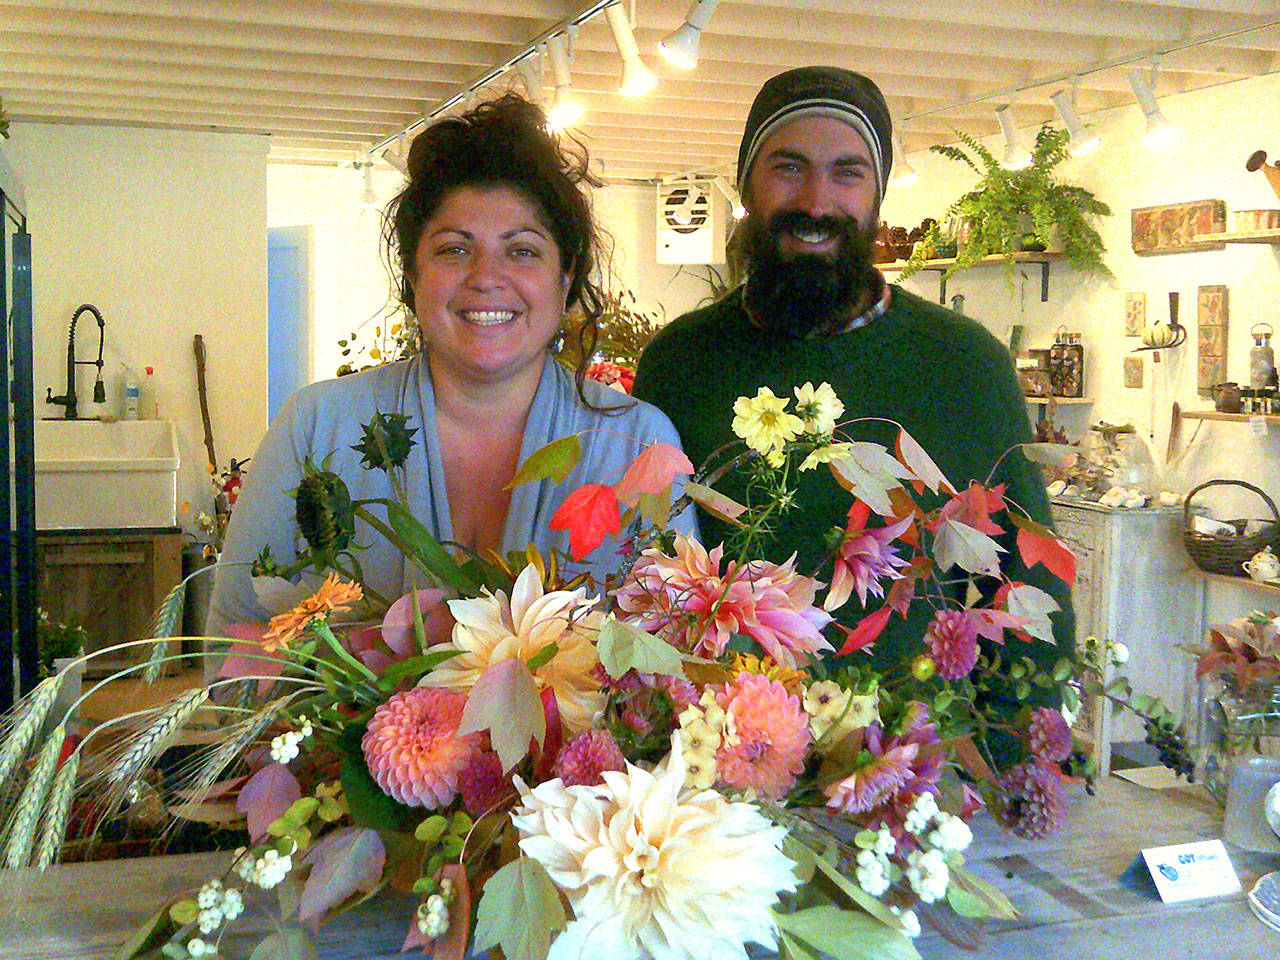 Contributed image — Melissa Brown and Ben Courteau recently opened the Flying Bear flower shop on First Street.